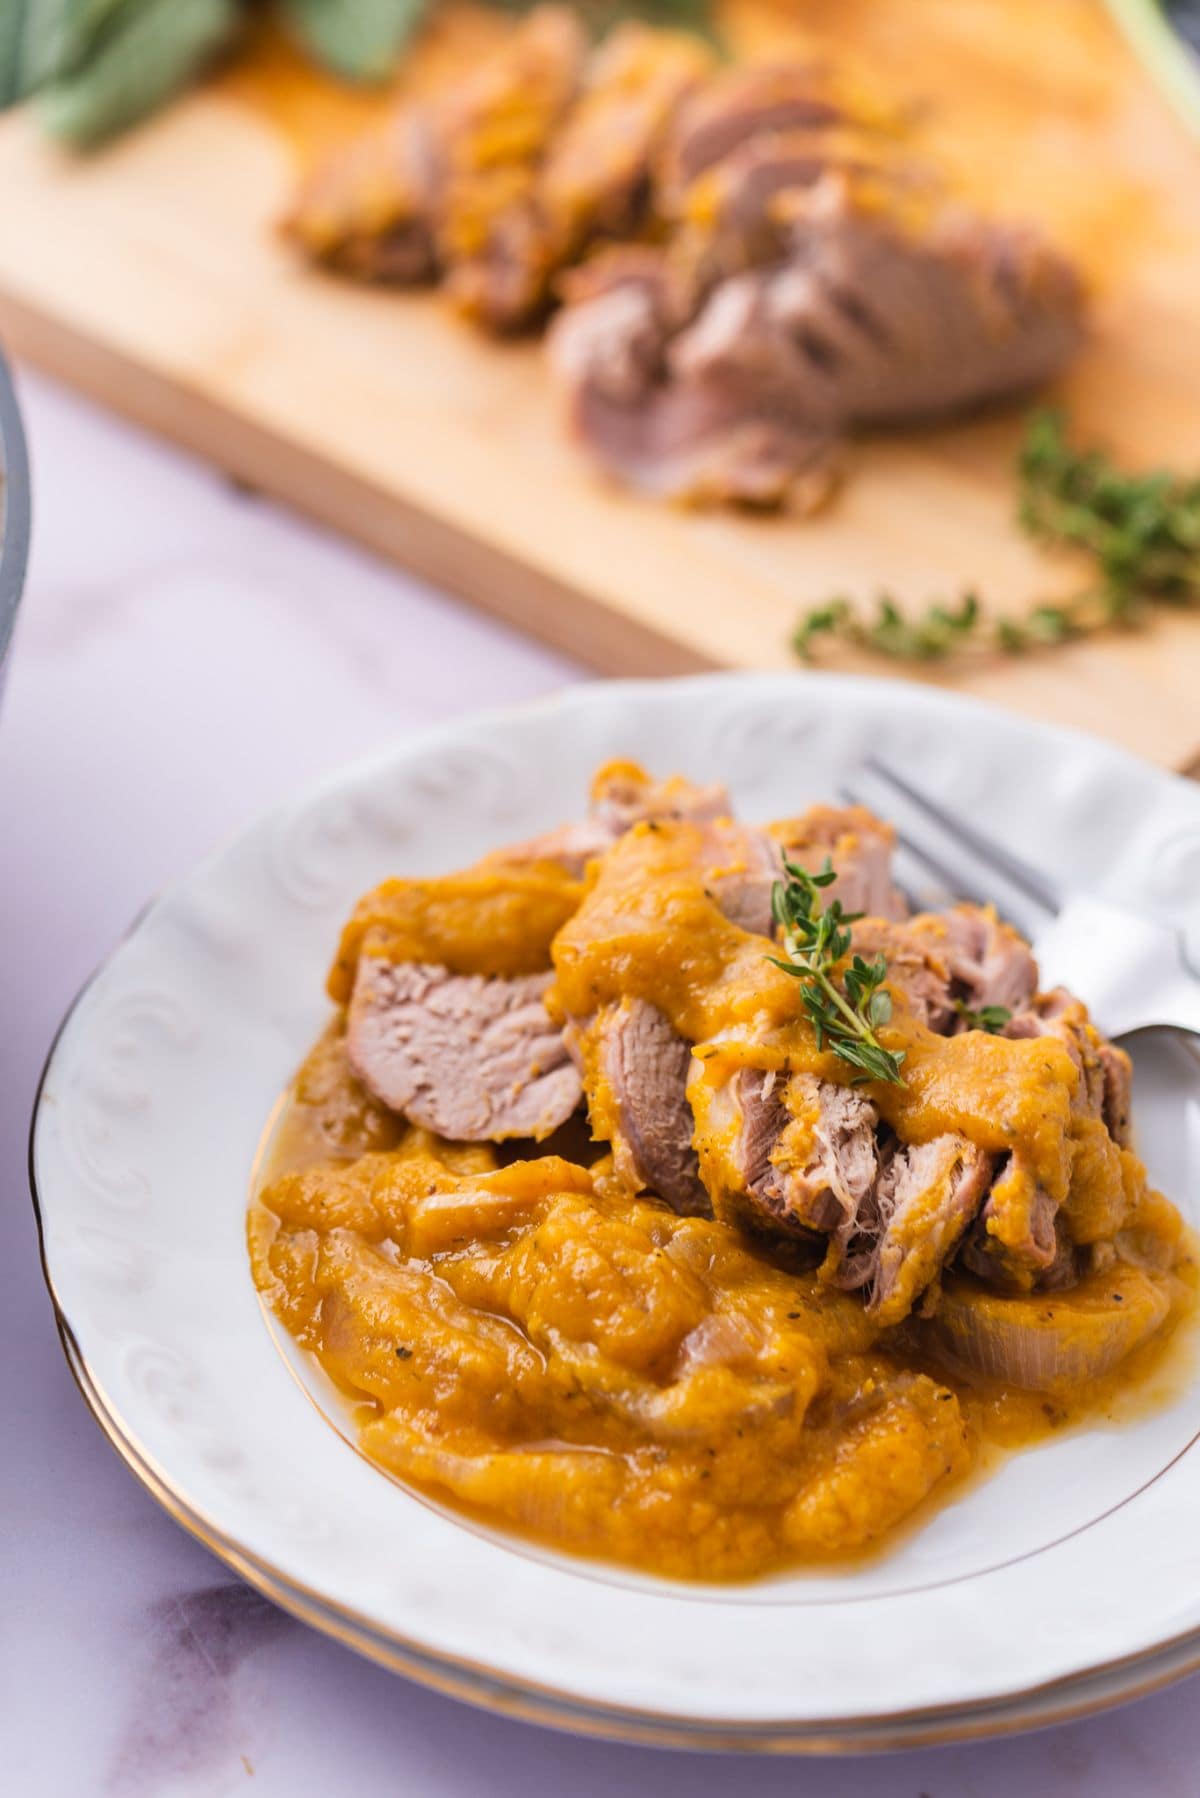 Slow cooker pork loin with peach sauce 6